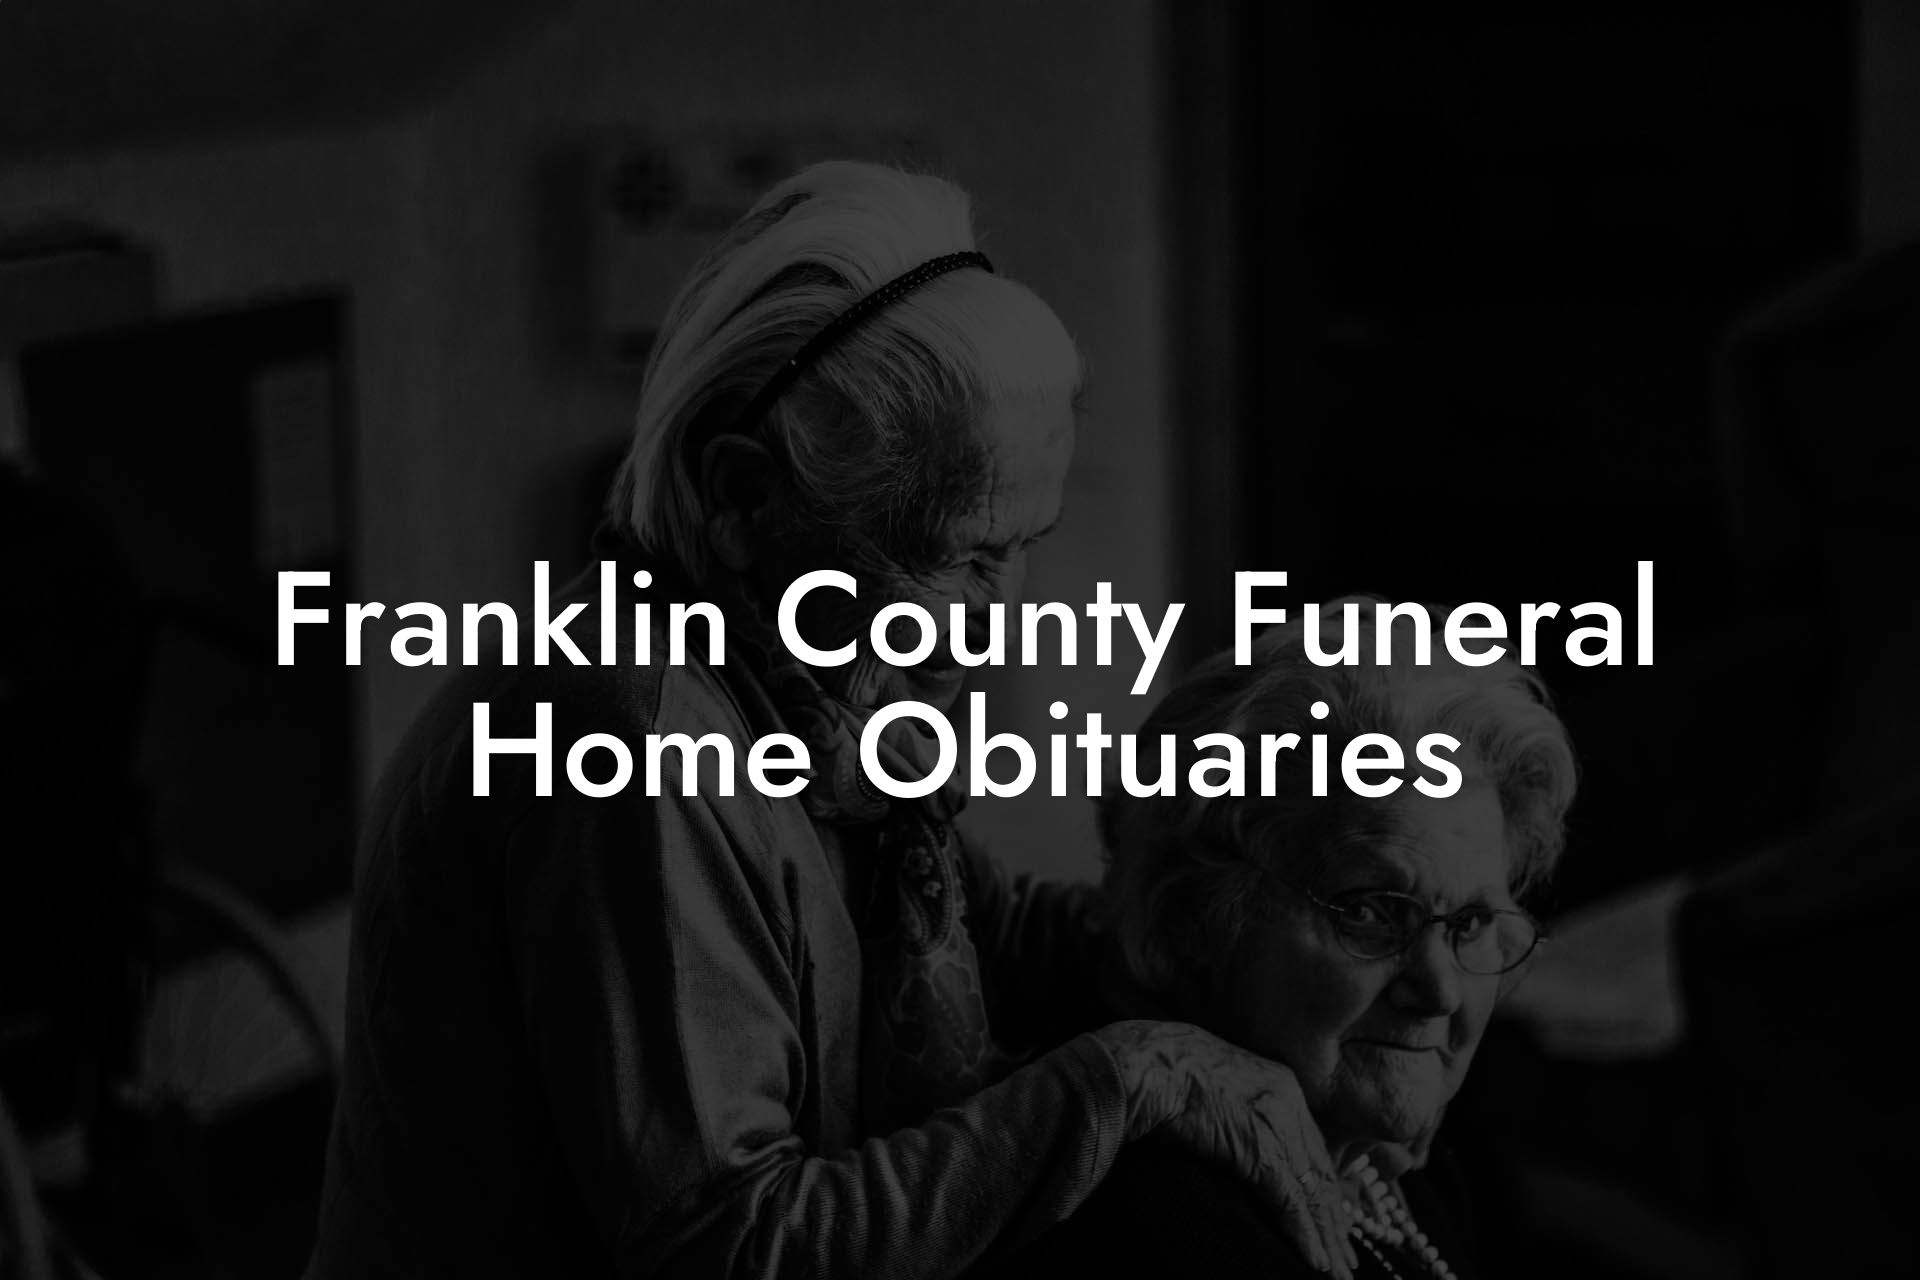 Franklin County Funeral Home Obituaries